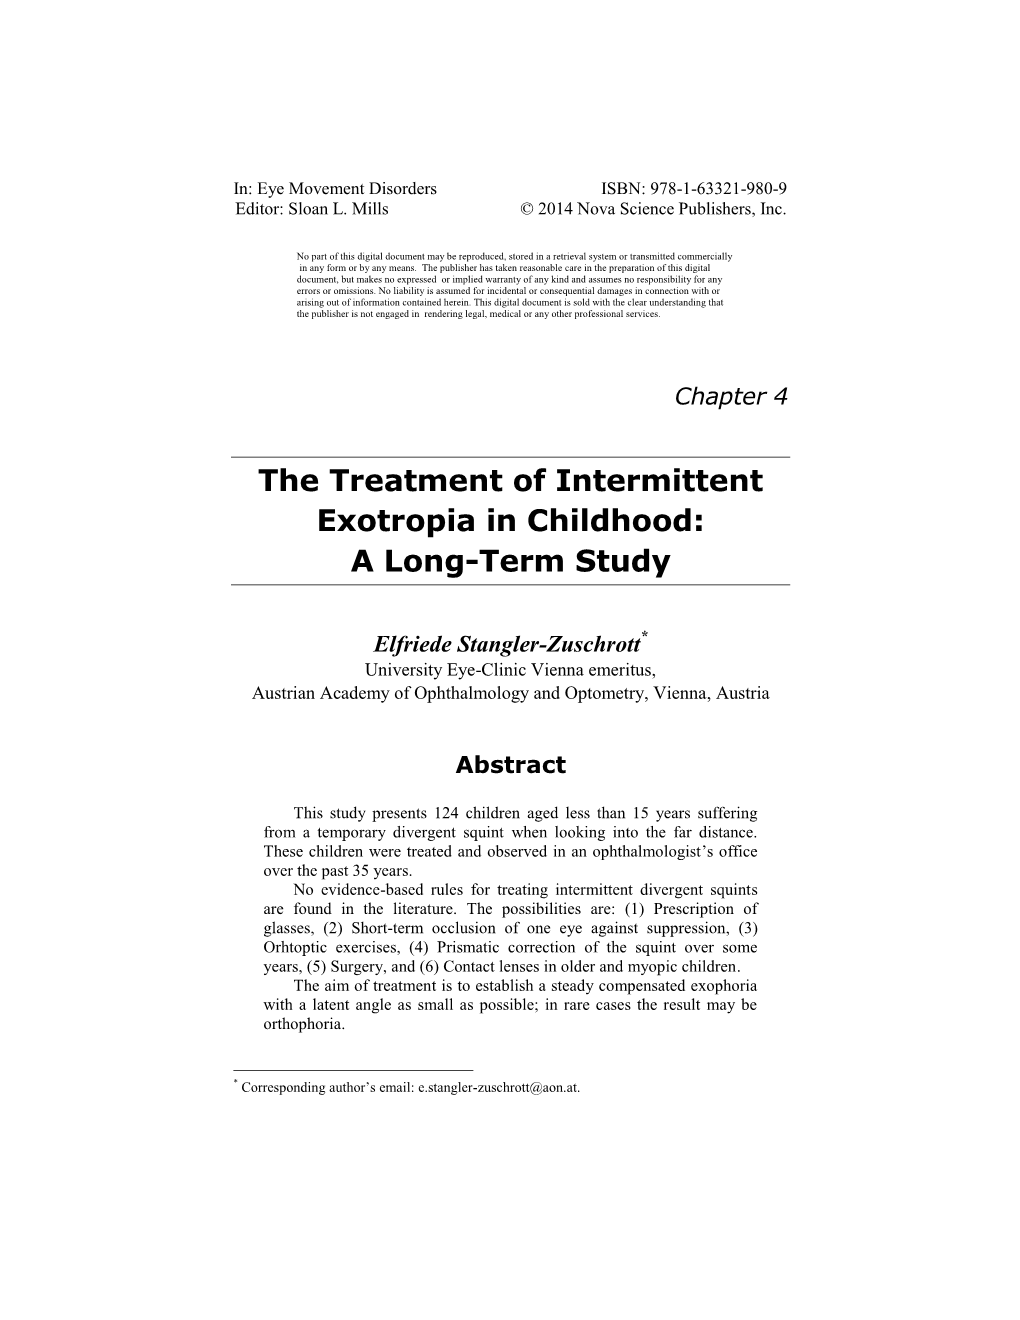 The Treatment of Intermittent Exotropia in Childhood: a Long-Term Study